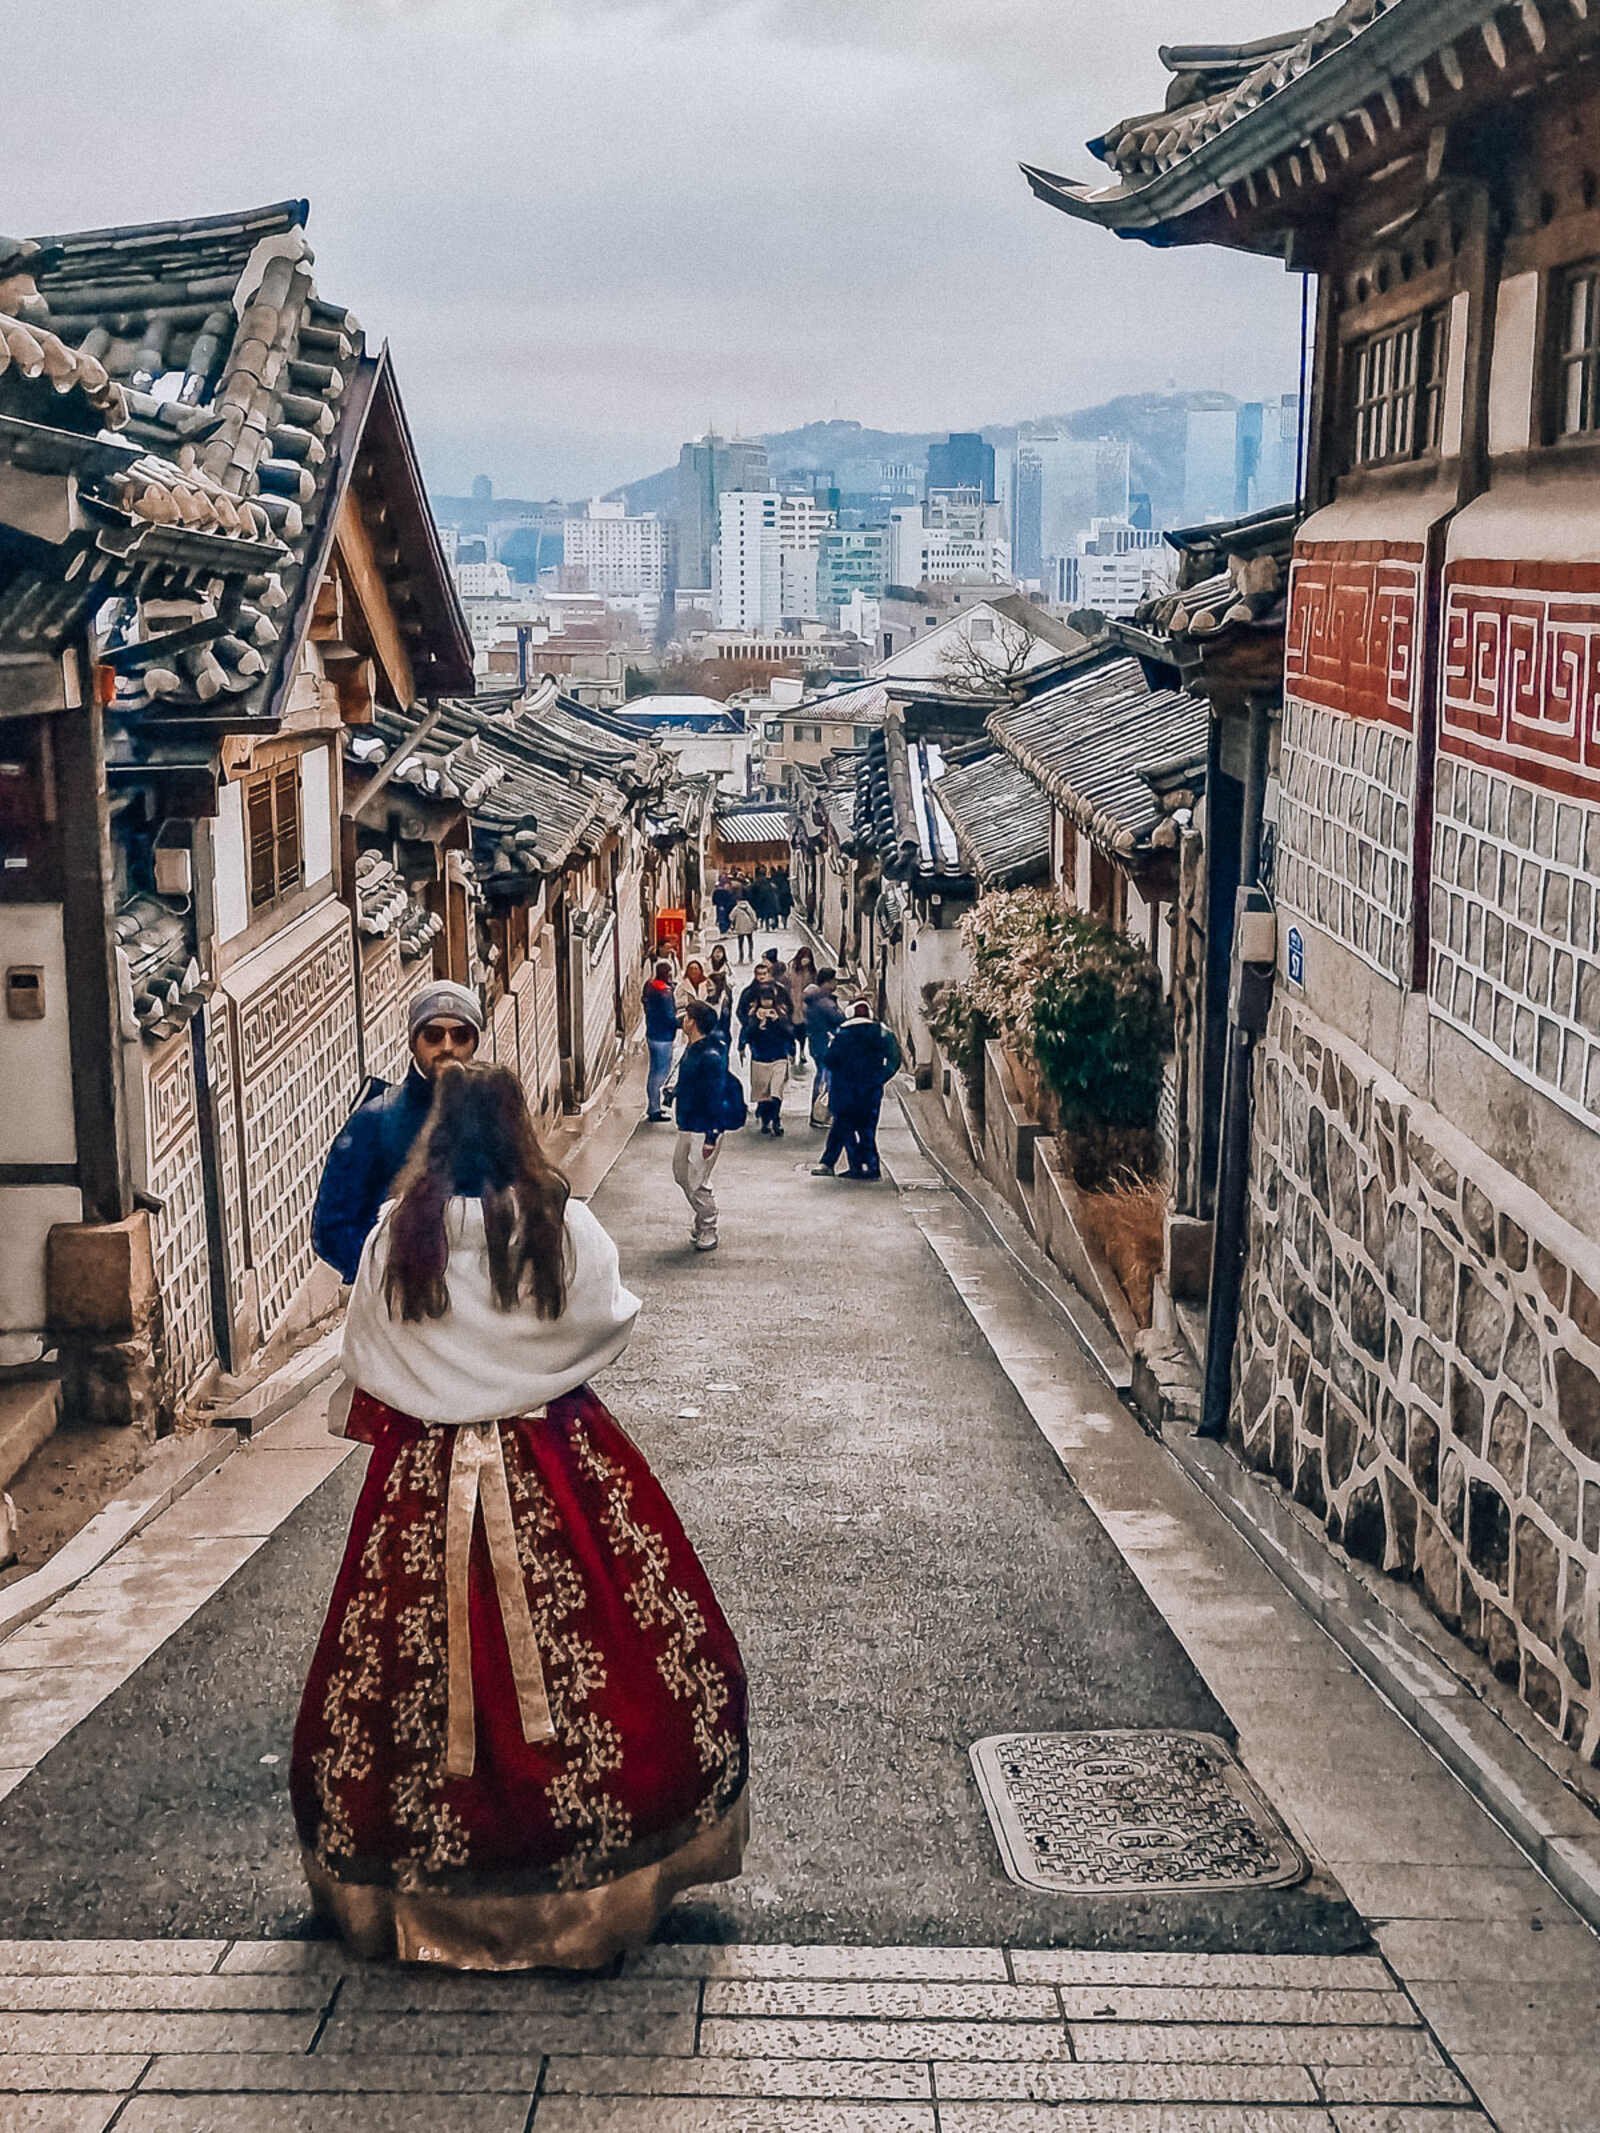 a woman in a traditional red hanbok korean dress looking down a street on a hill in a traditional village. Seoul city is visible in the distance